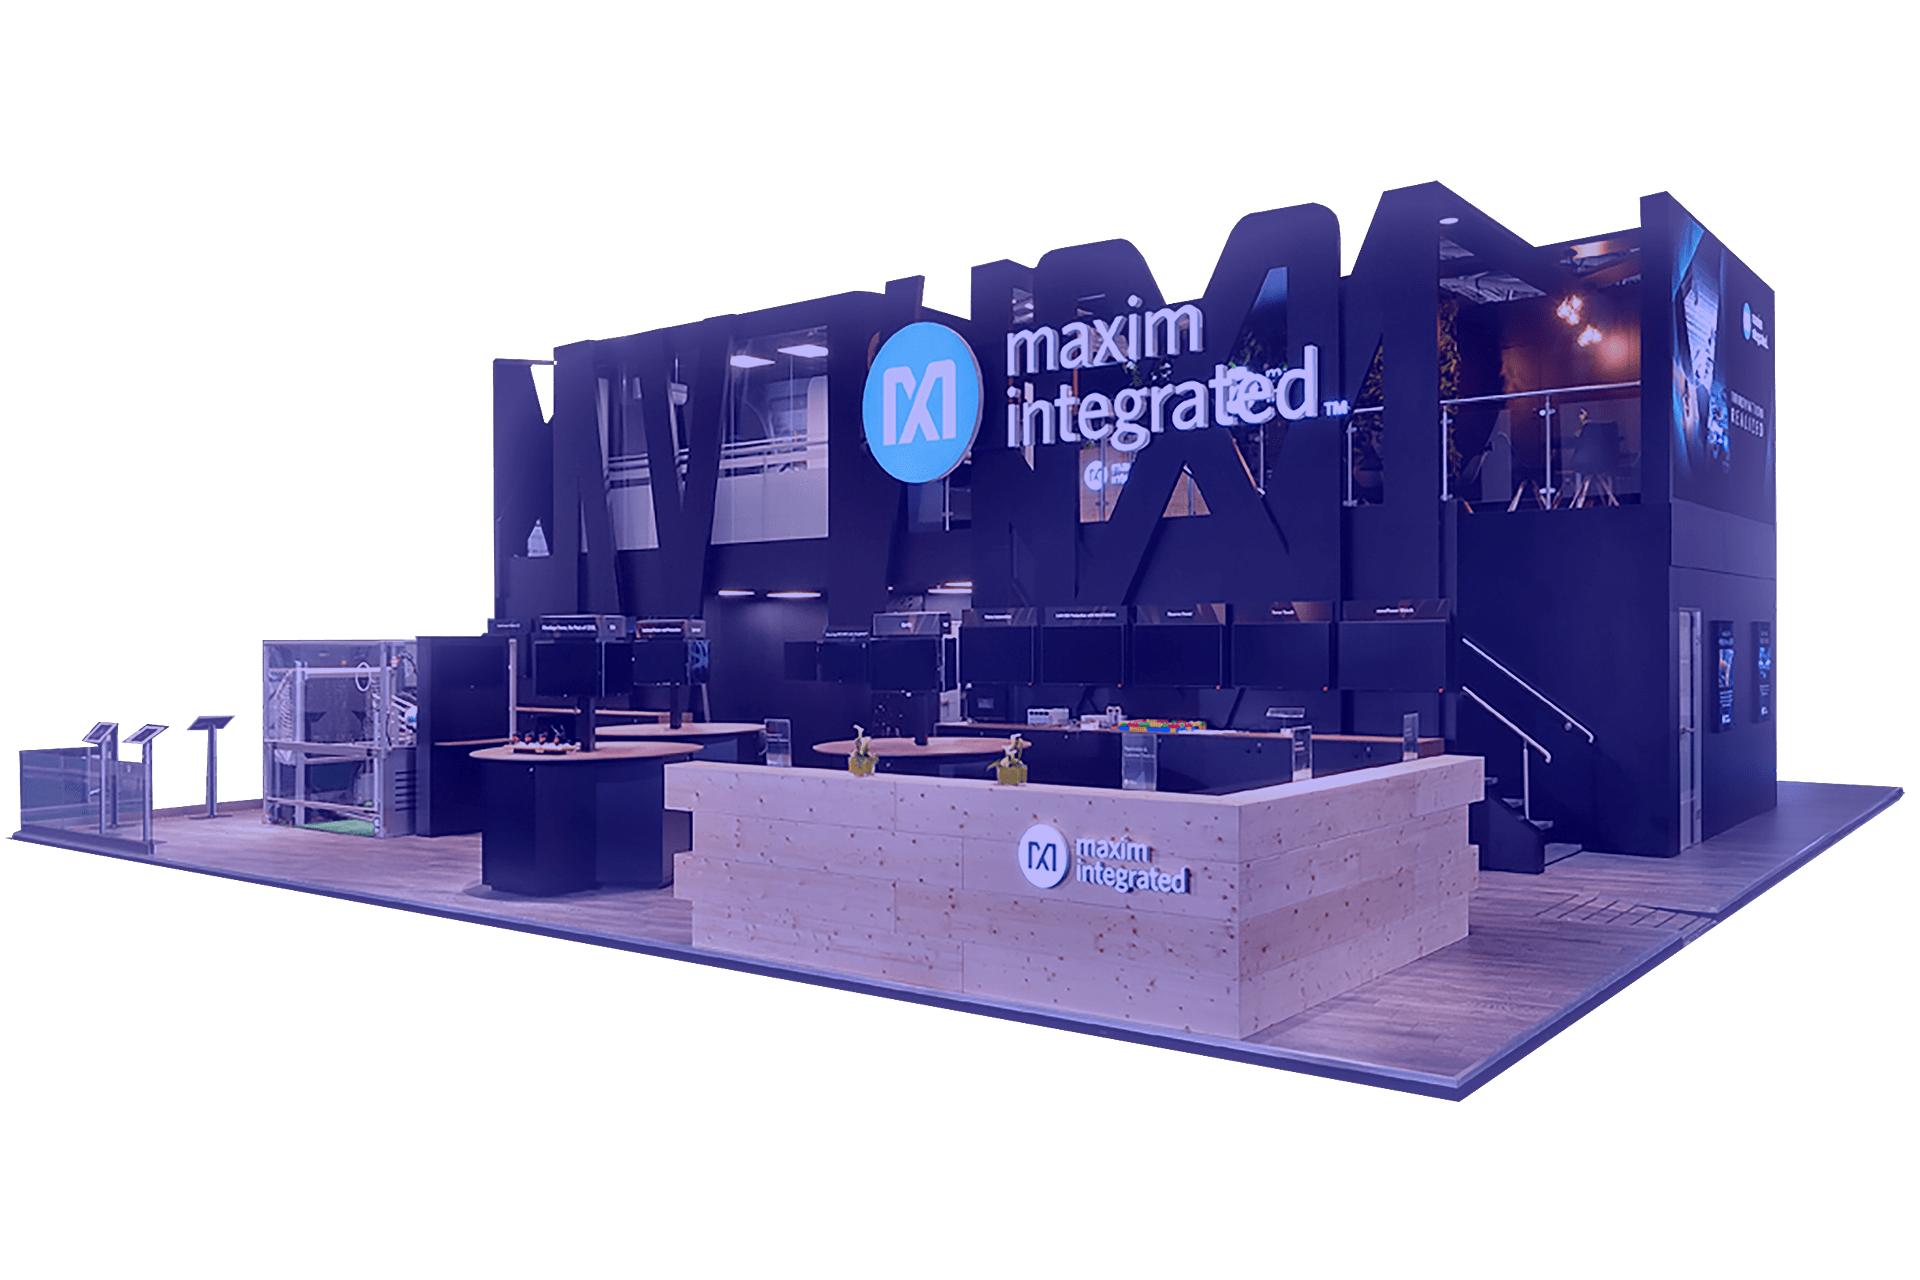 Maxim Integrated Trade Show Booth by Nebula Exhibits